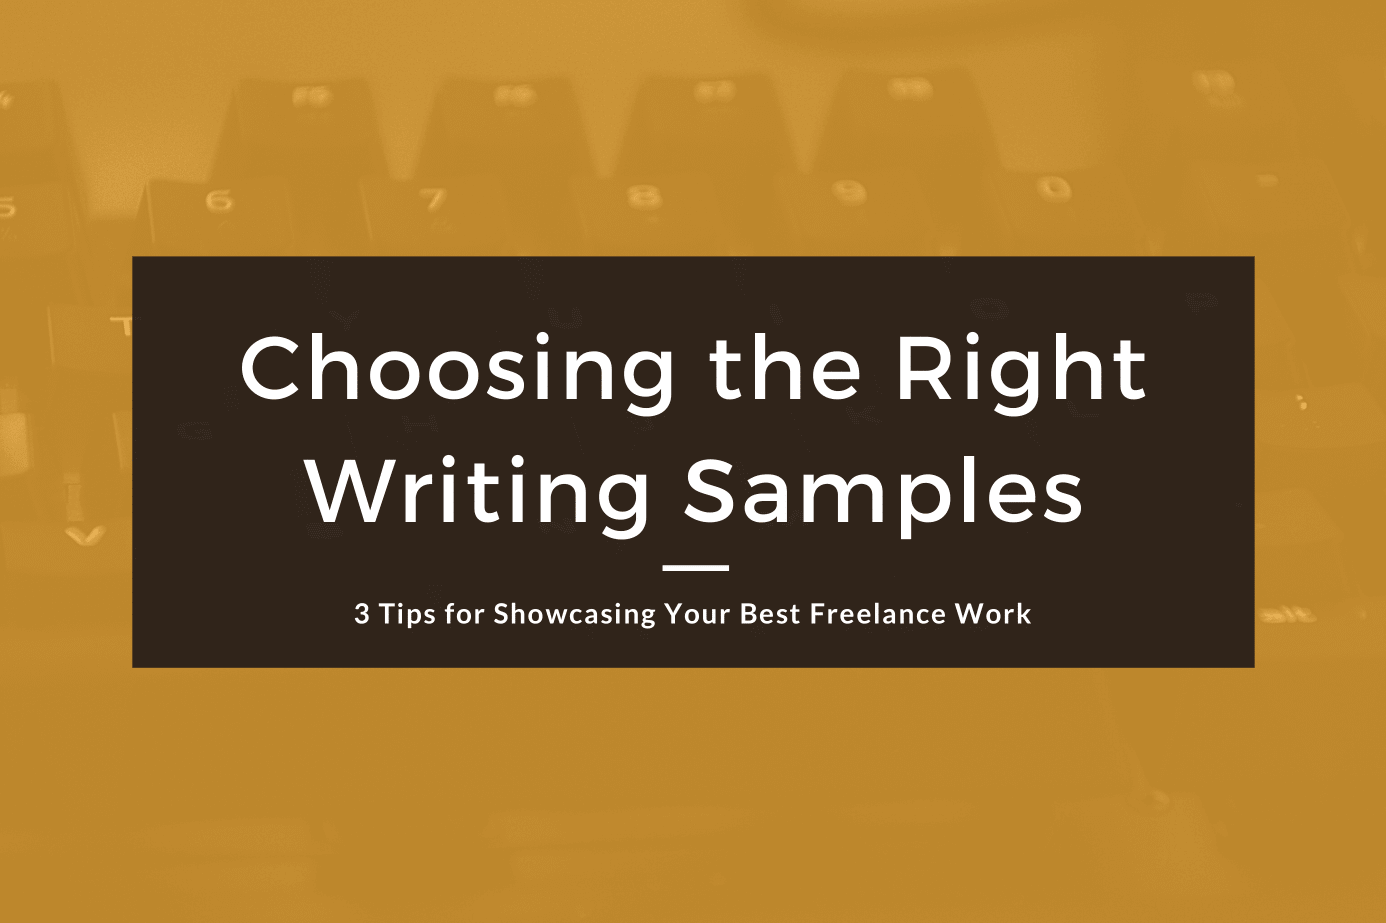 Choosing Your Freelance Writing Samples: 3 Tips to Showcase Client-Winning Work